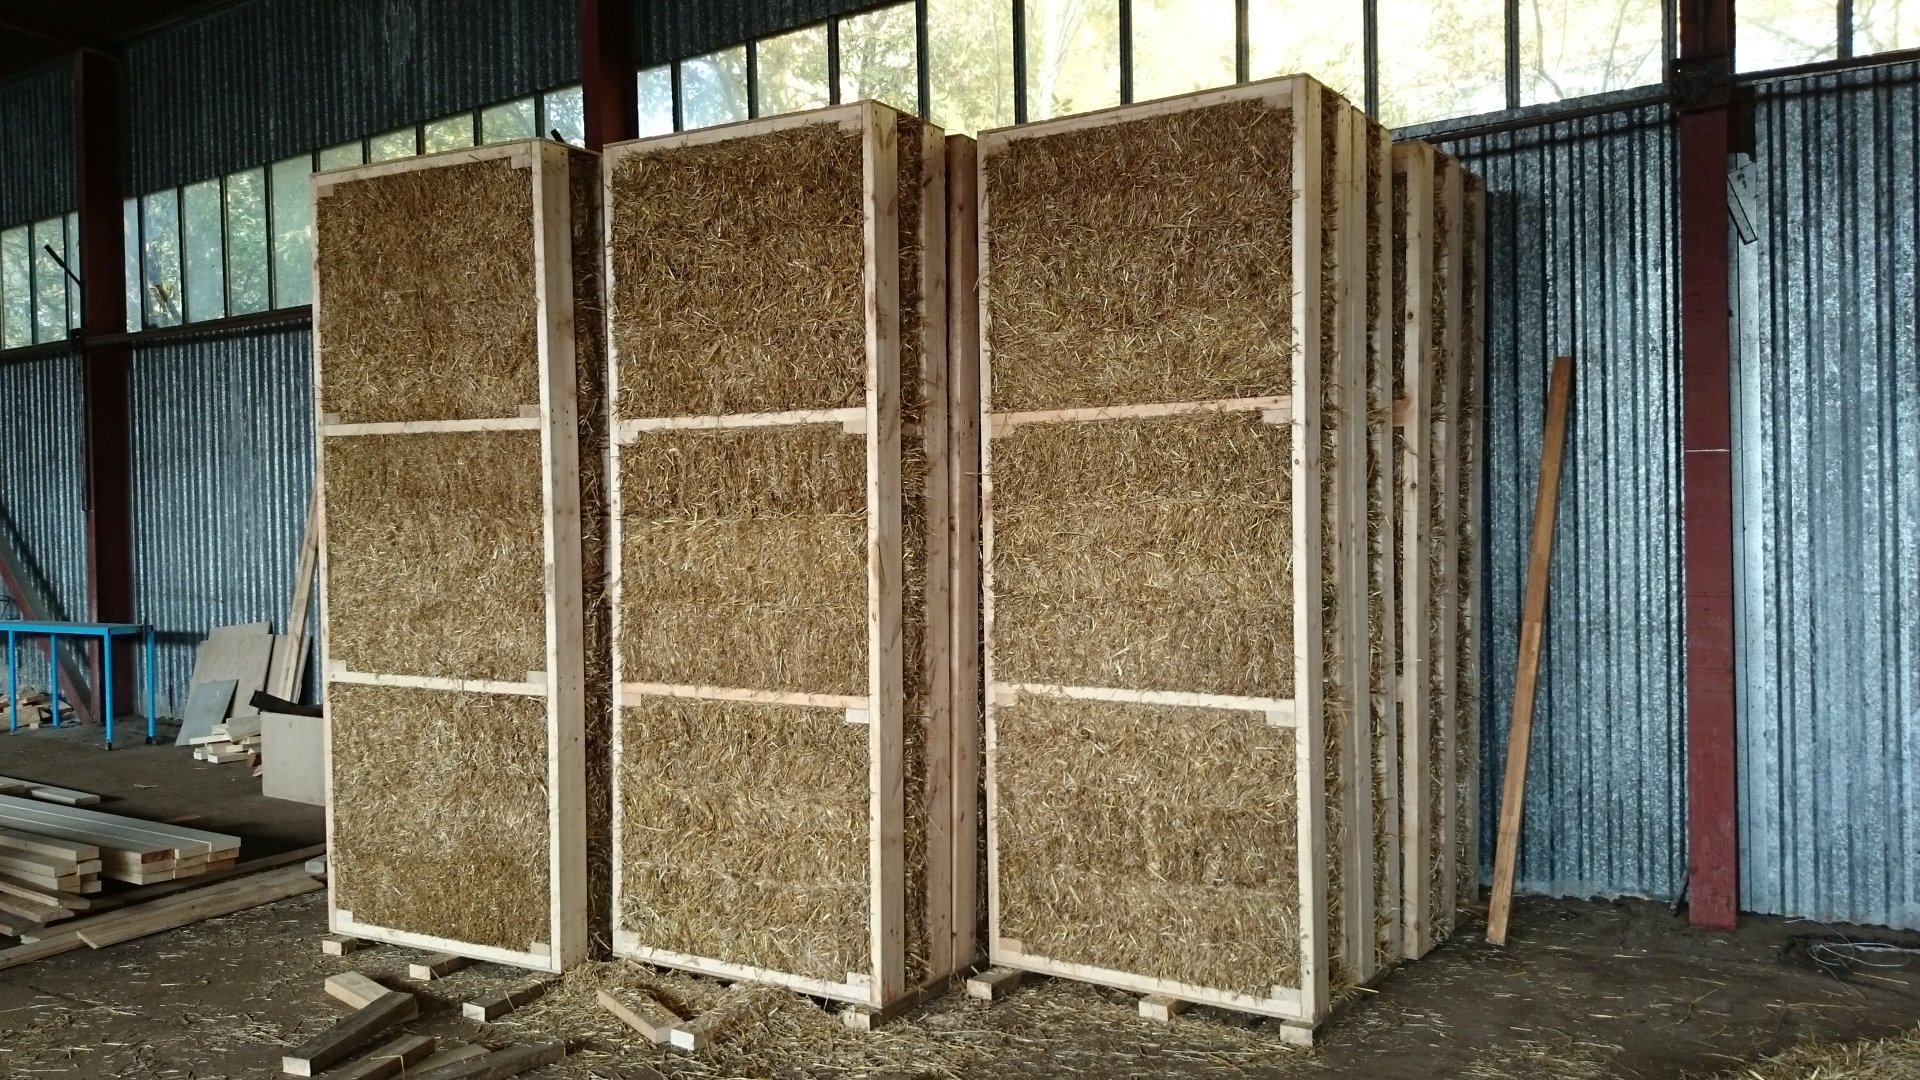 Pressed panels or straw blocks - an inexpensive and sustainable cladding option